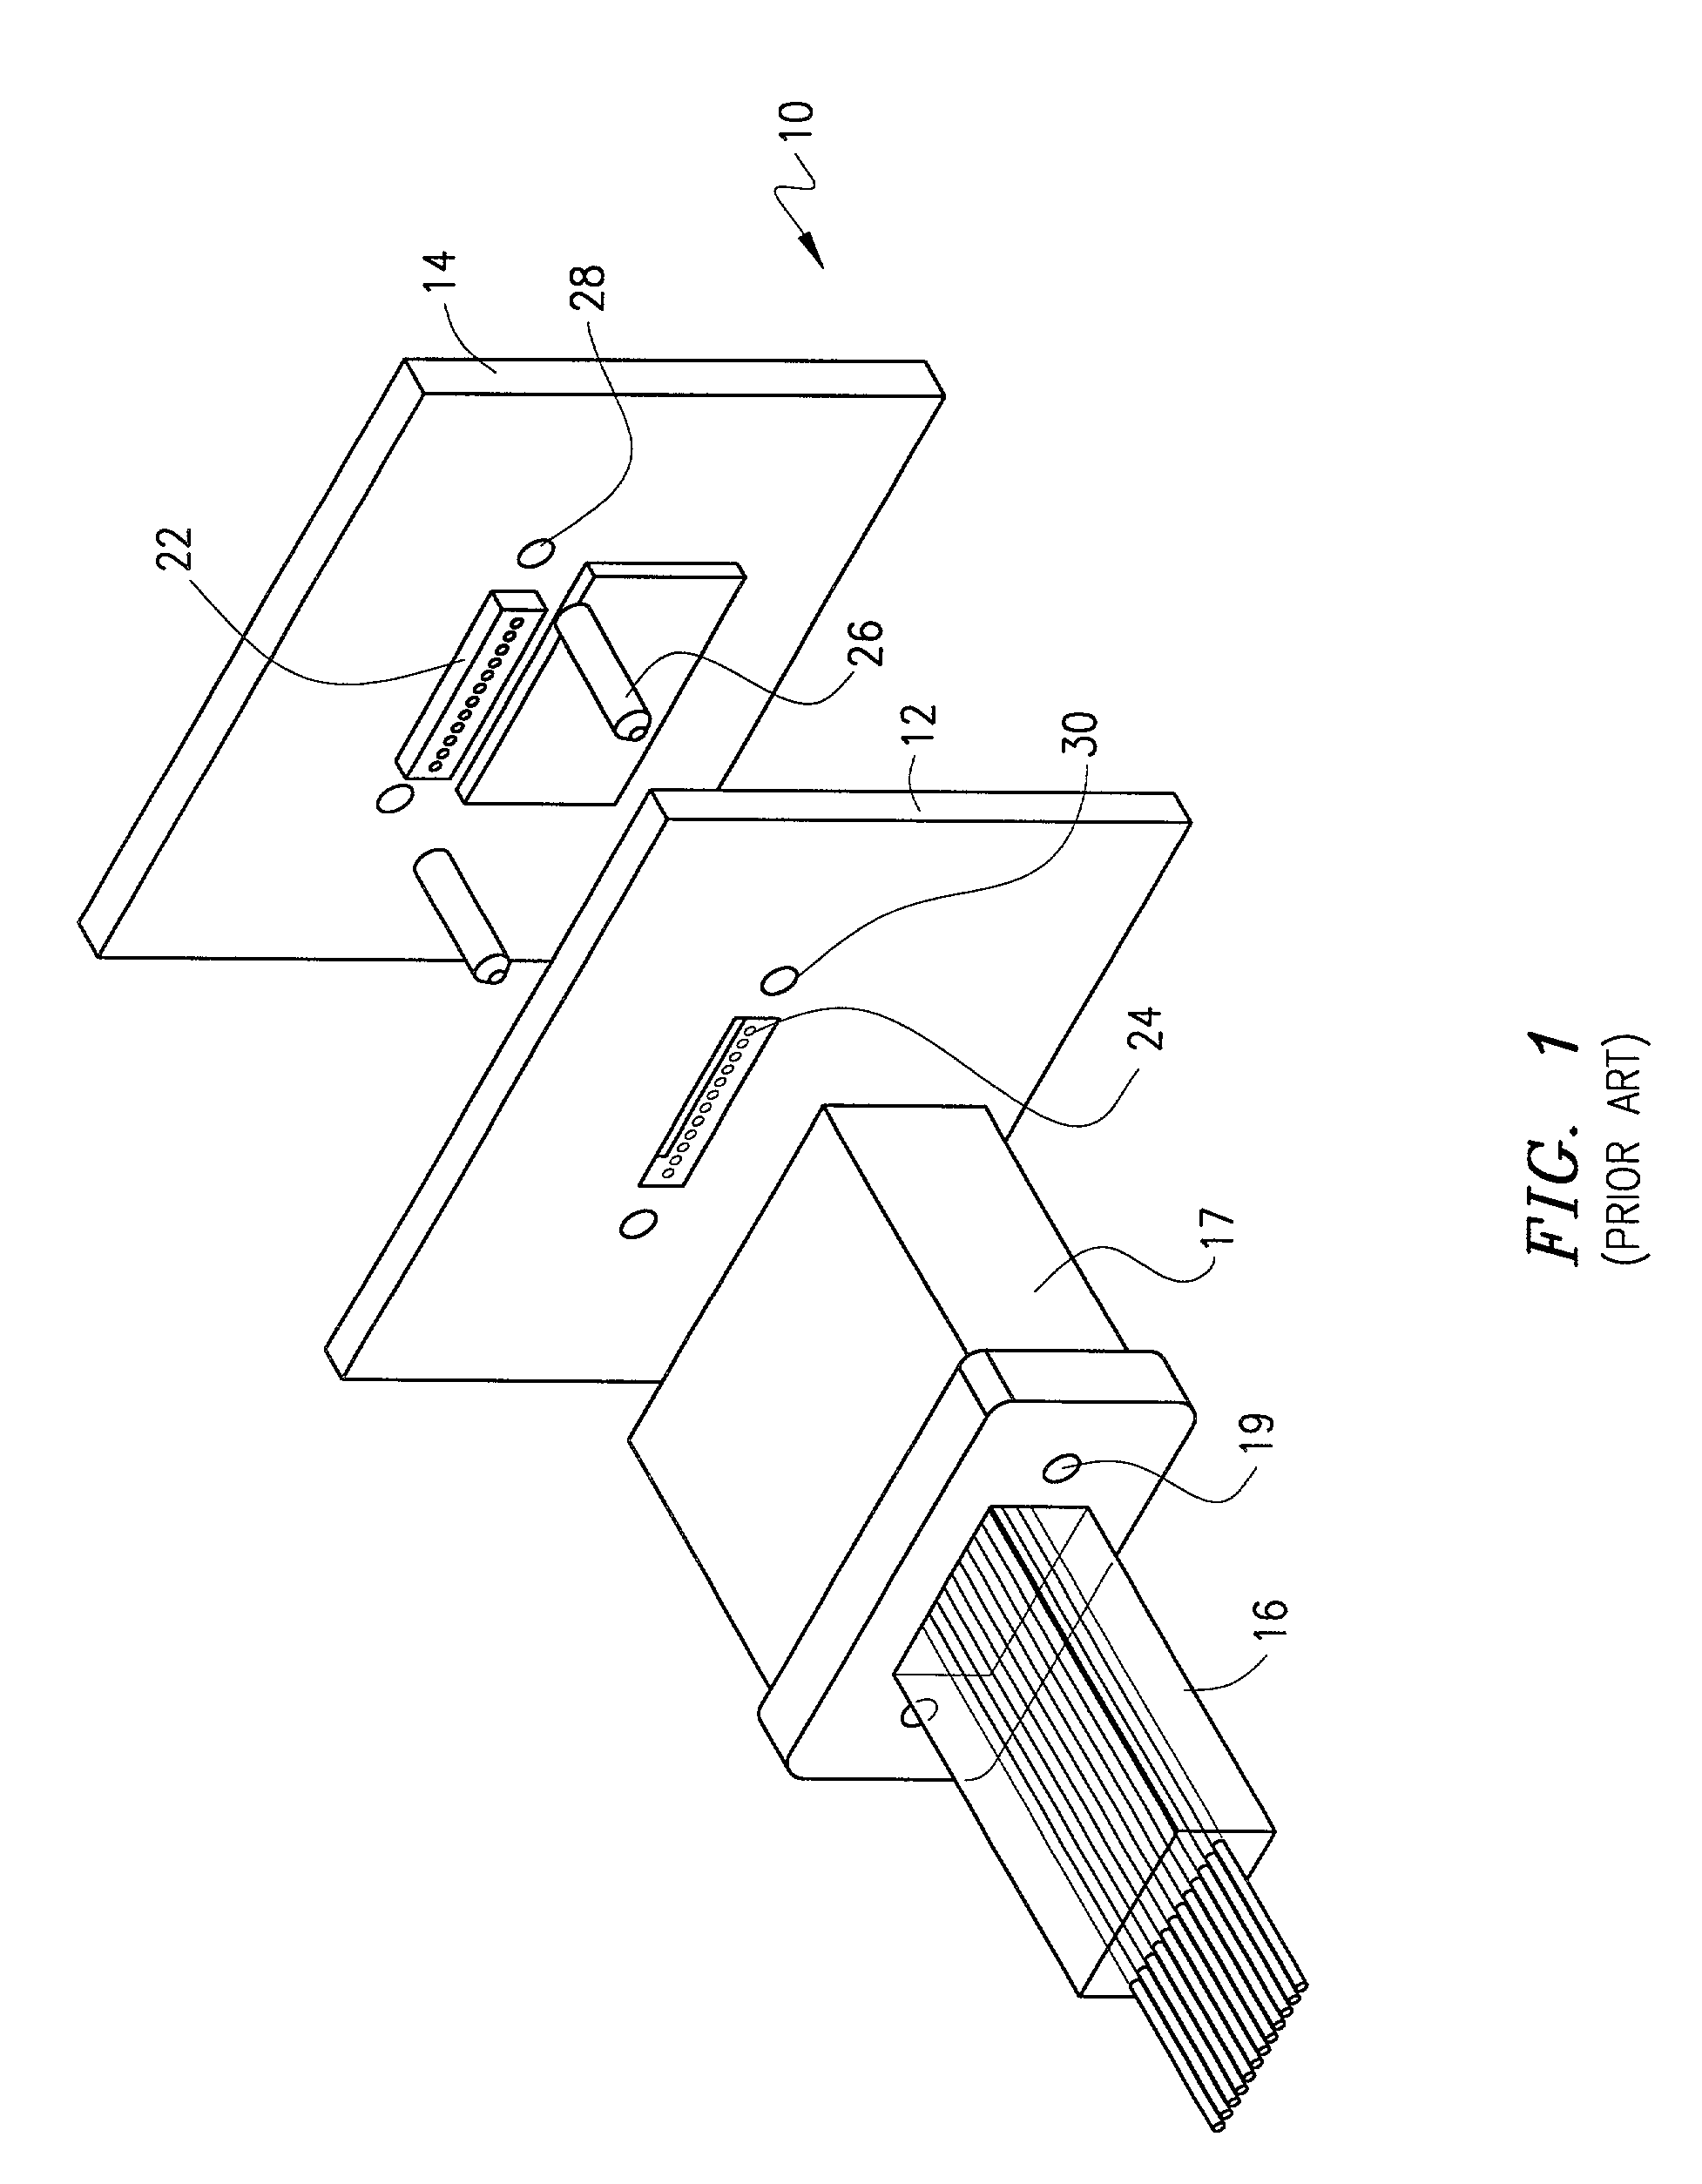 Optical device, enclosure and method of fabricating